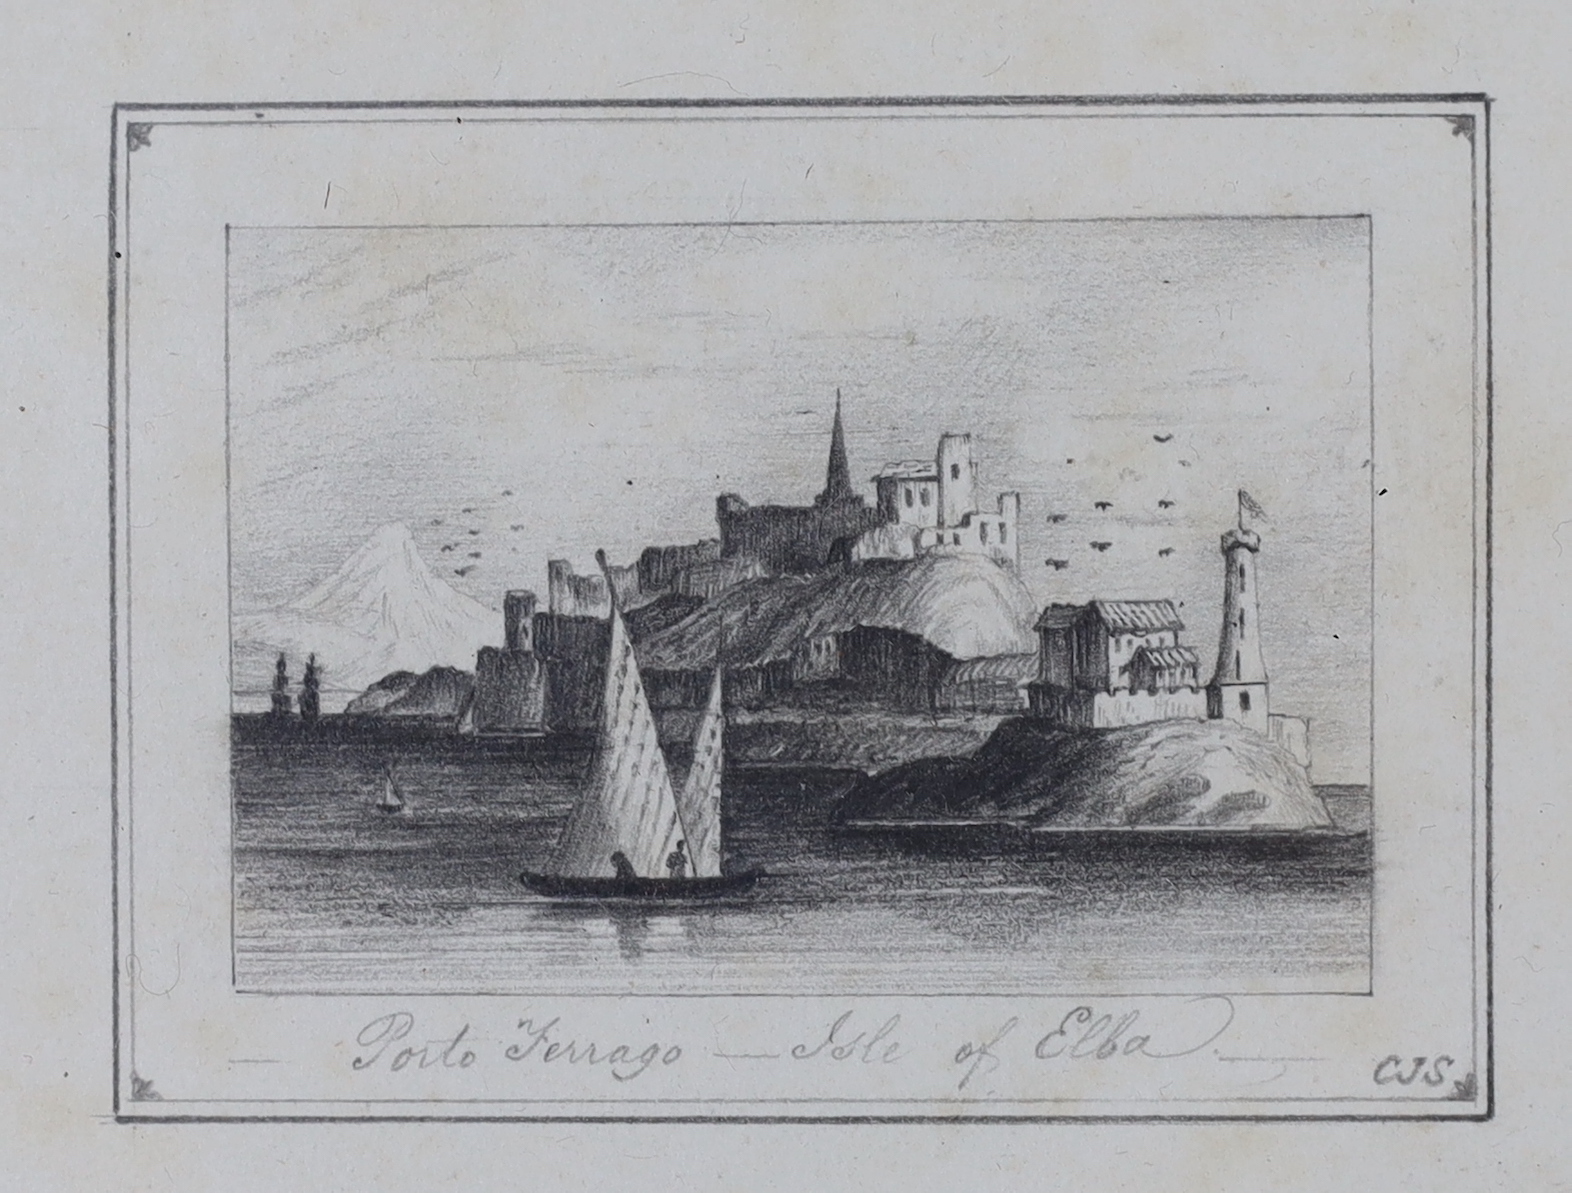 C.J.S. 1841, two pencil vignettes of Upnore Castle and Porto Ferrago, initialled, one dated, 6 x 9 cm and 4.5 x 5.5cm